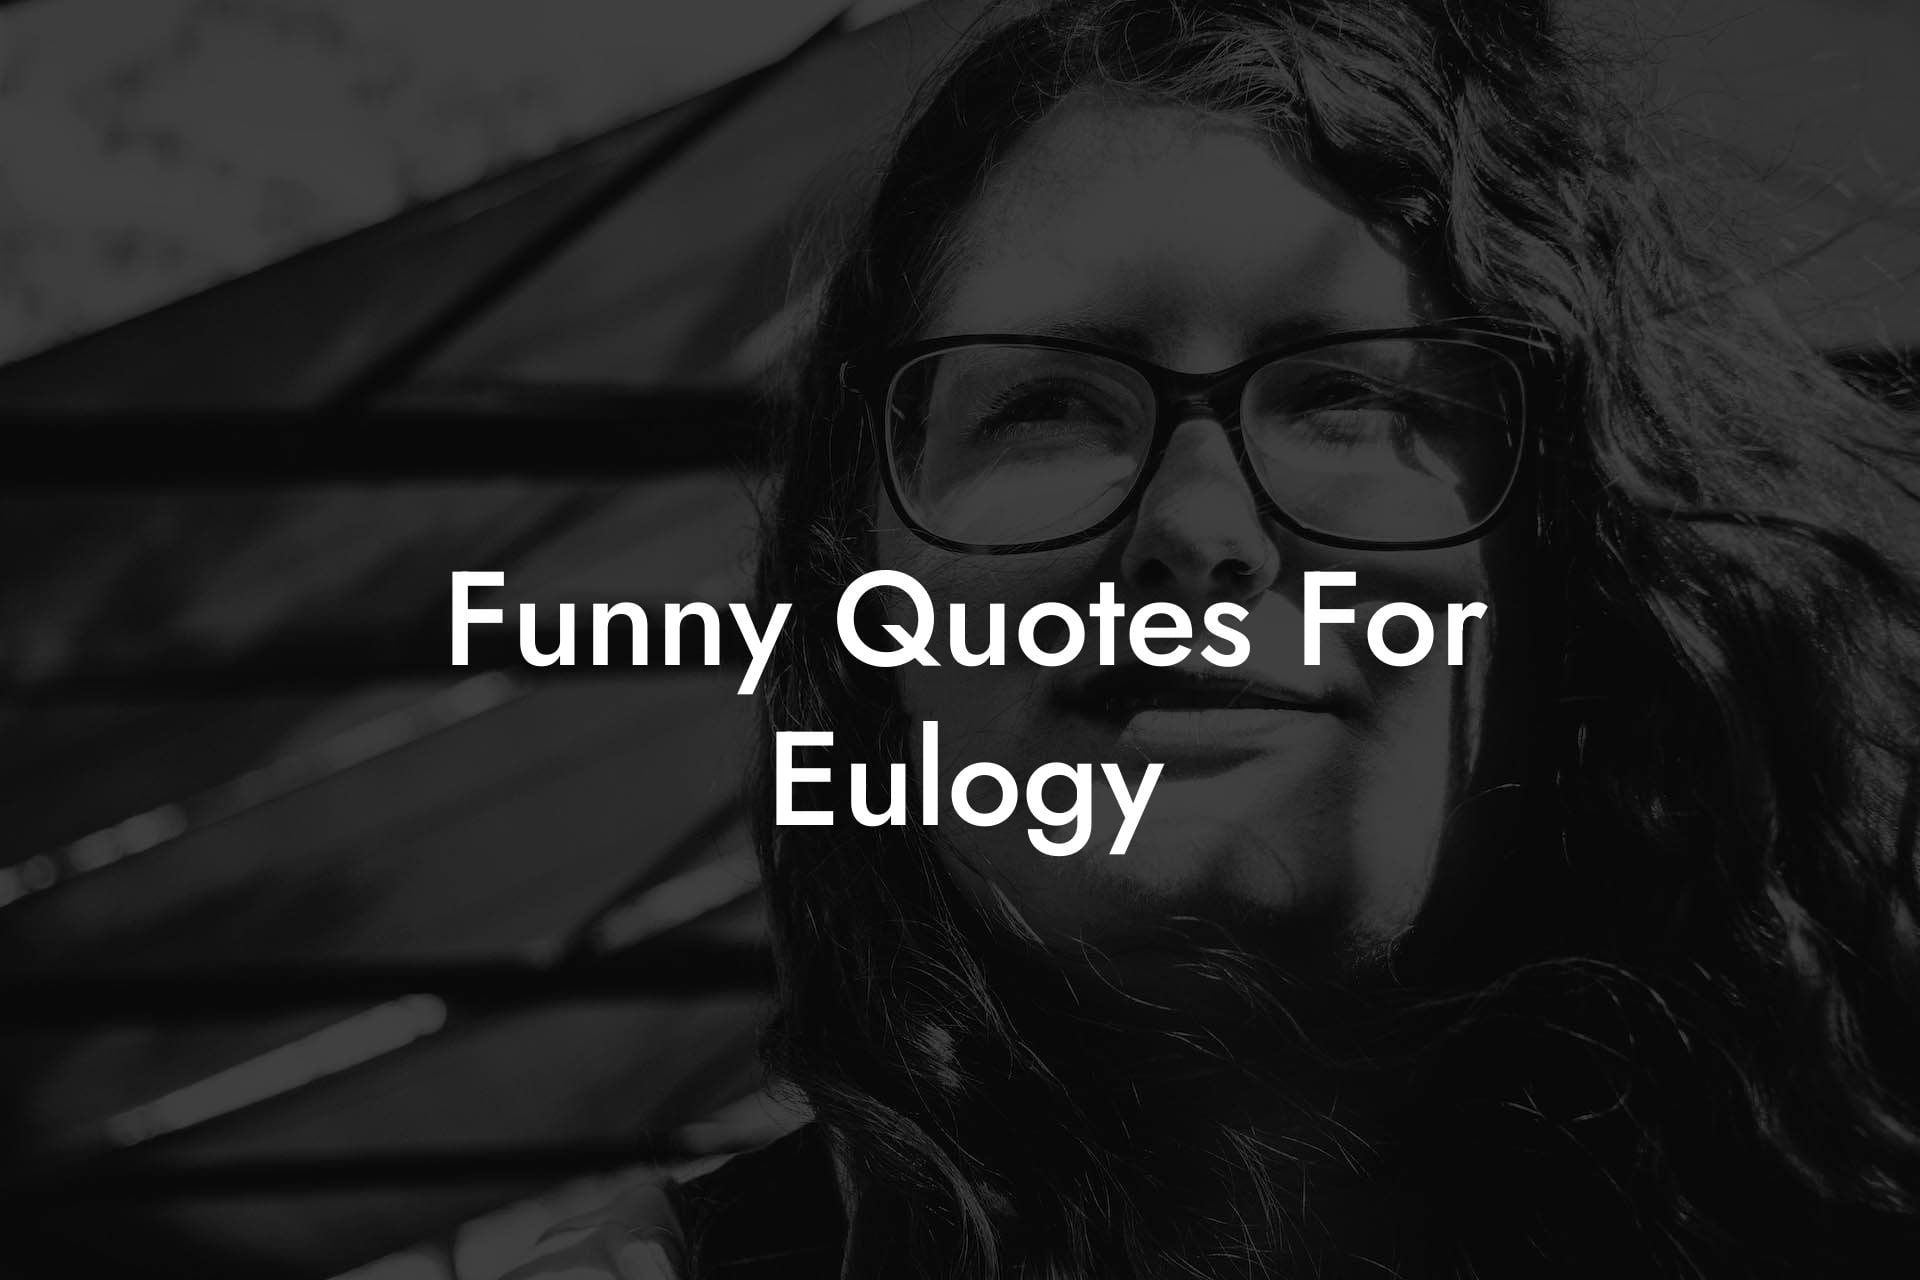 Funny Quotes For Eulogy